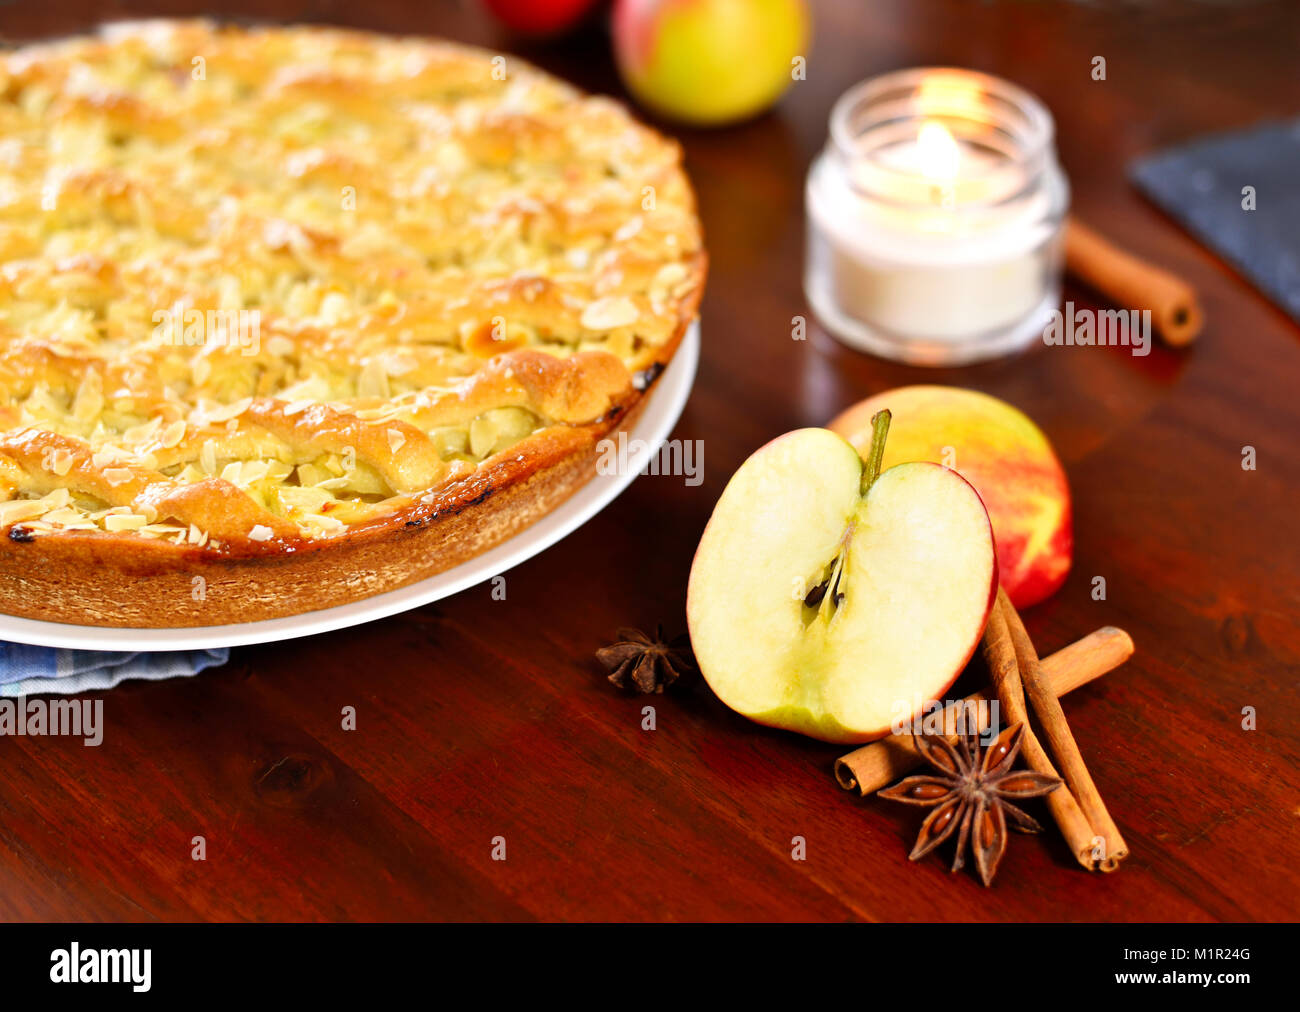 Fresh apple pie or fruitcake on a wooden table. Apple pie and fresh apples, cinnamon and star anise. Cake background. Stock Photo